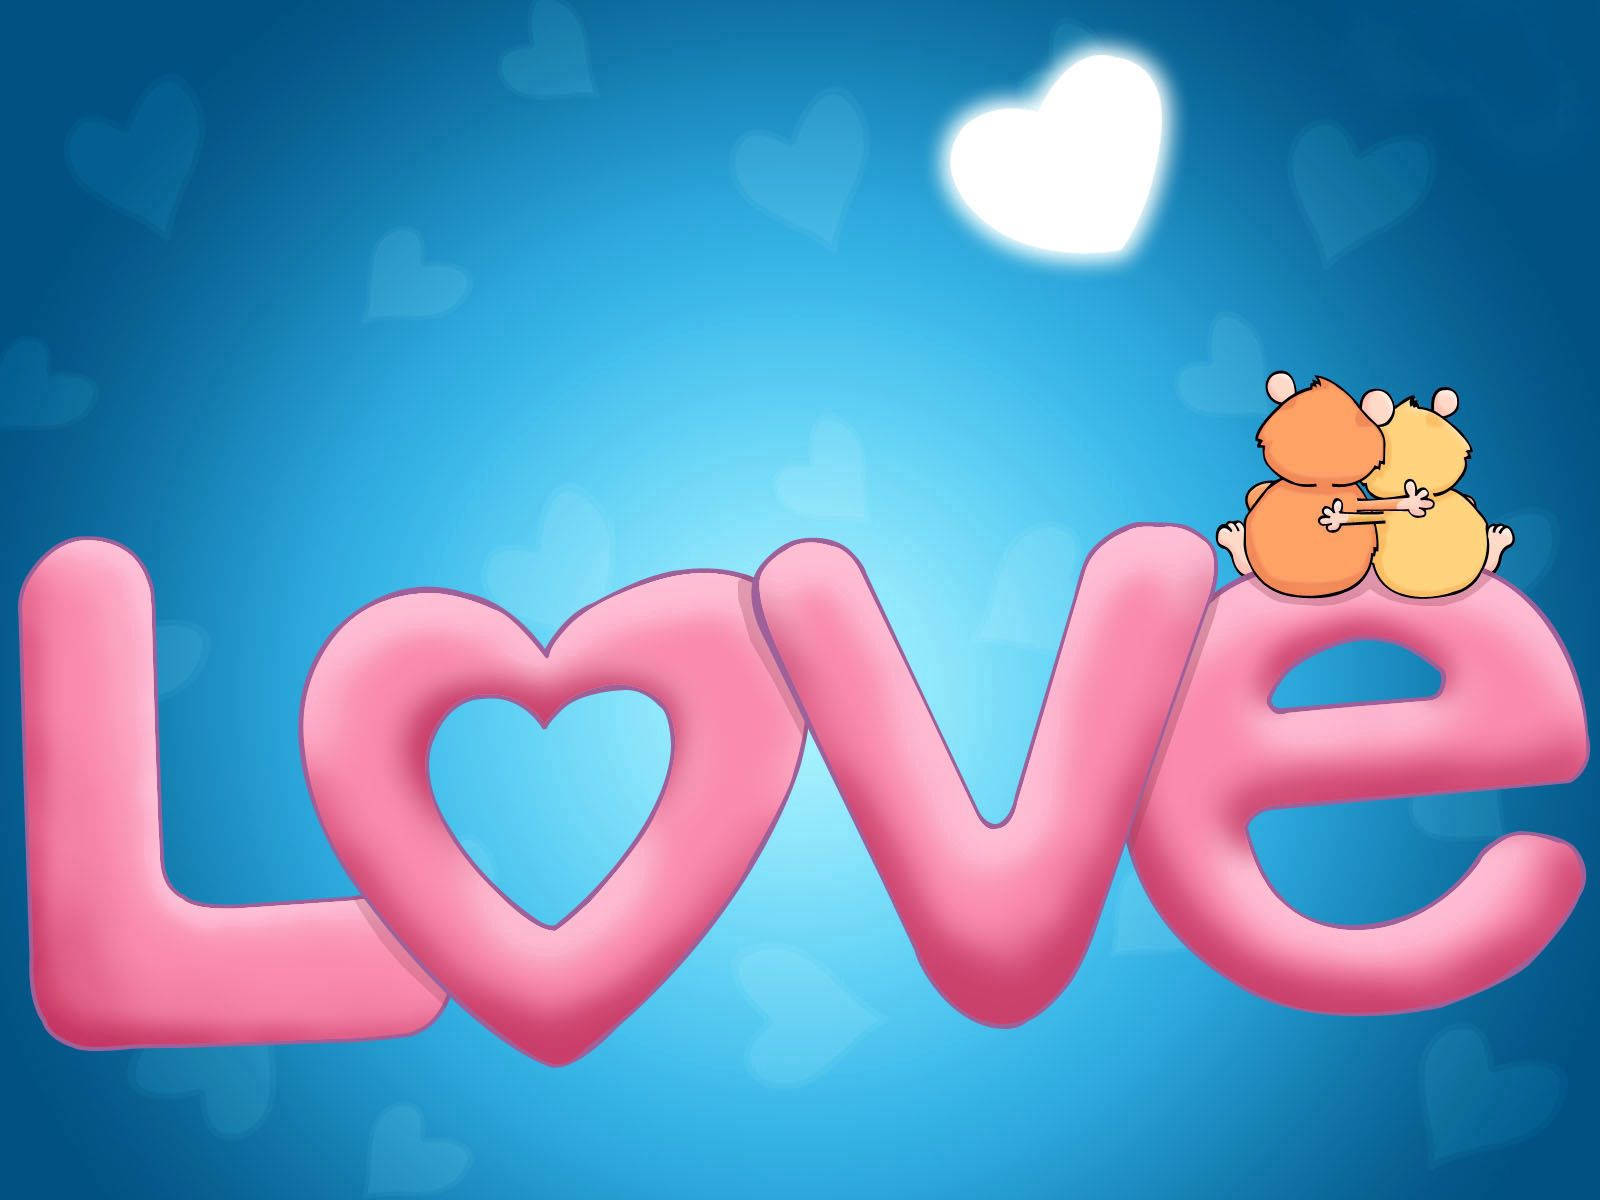 Cute and Cuddly Love Wallpaper